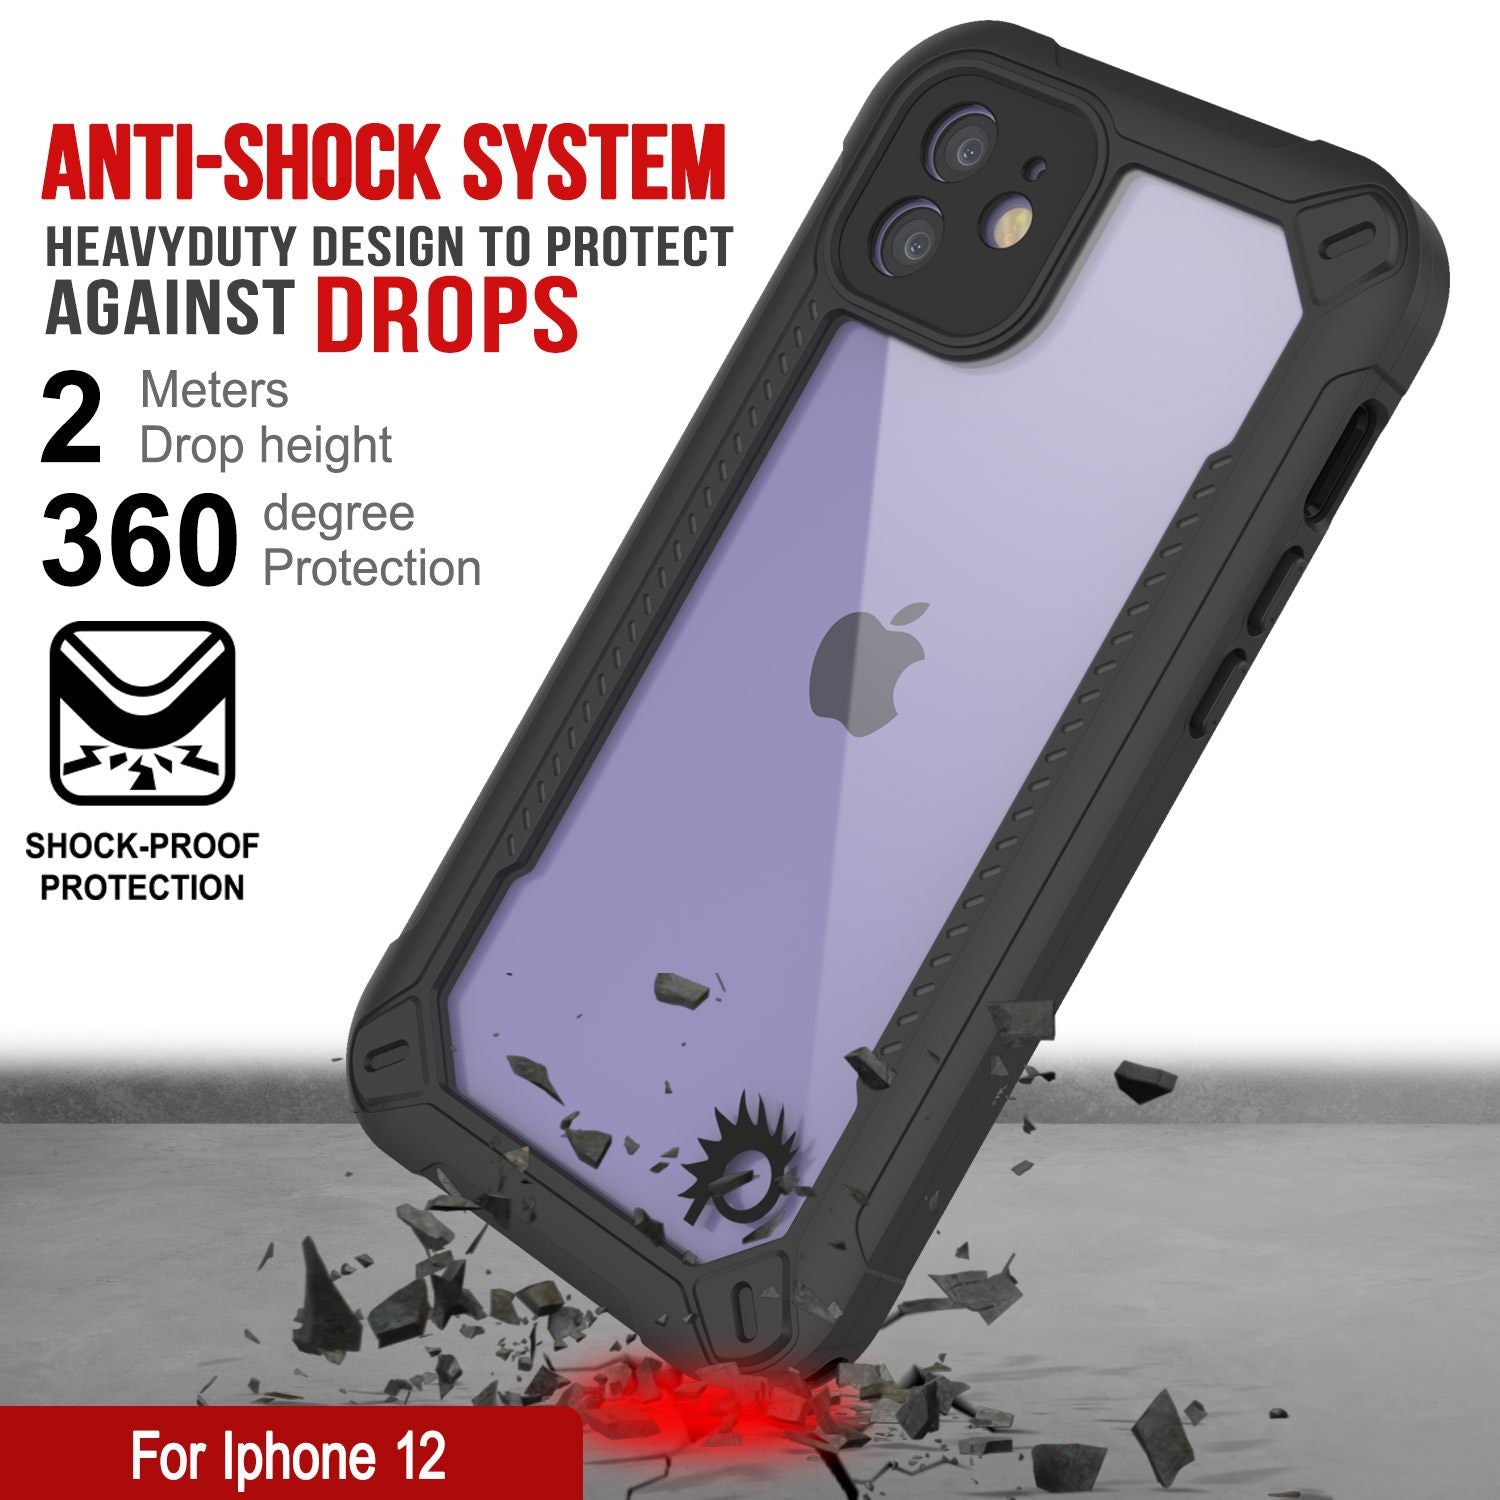 iPhone 12 Waterproof IP68 Case, Punkcase [Black]  [Maximus Series] [Slim Fit] [IP68 Certified] [Shockresistant] Clear Armor Cover with Screen Protector | Ultimate Protection